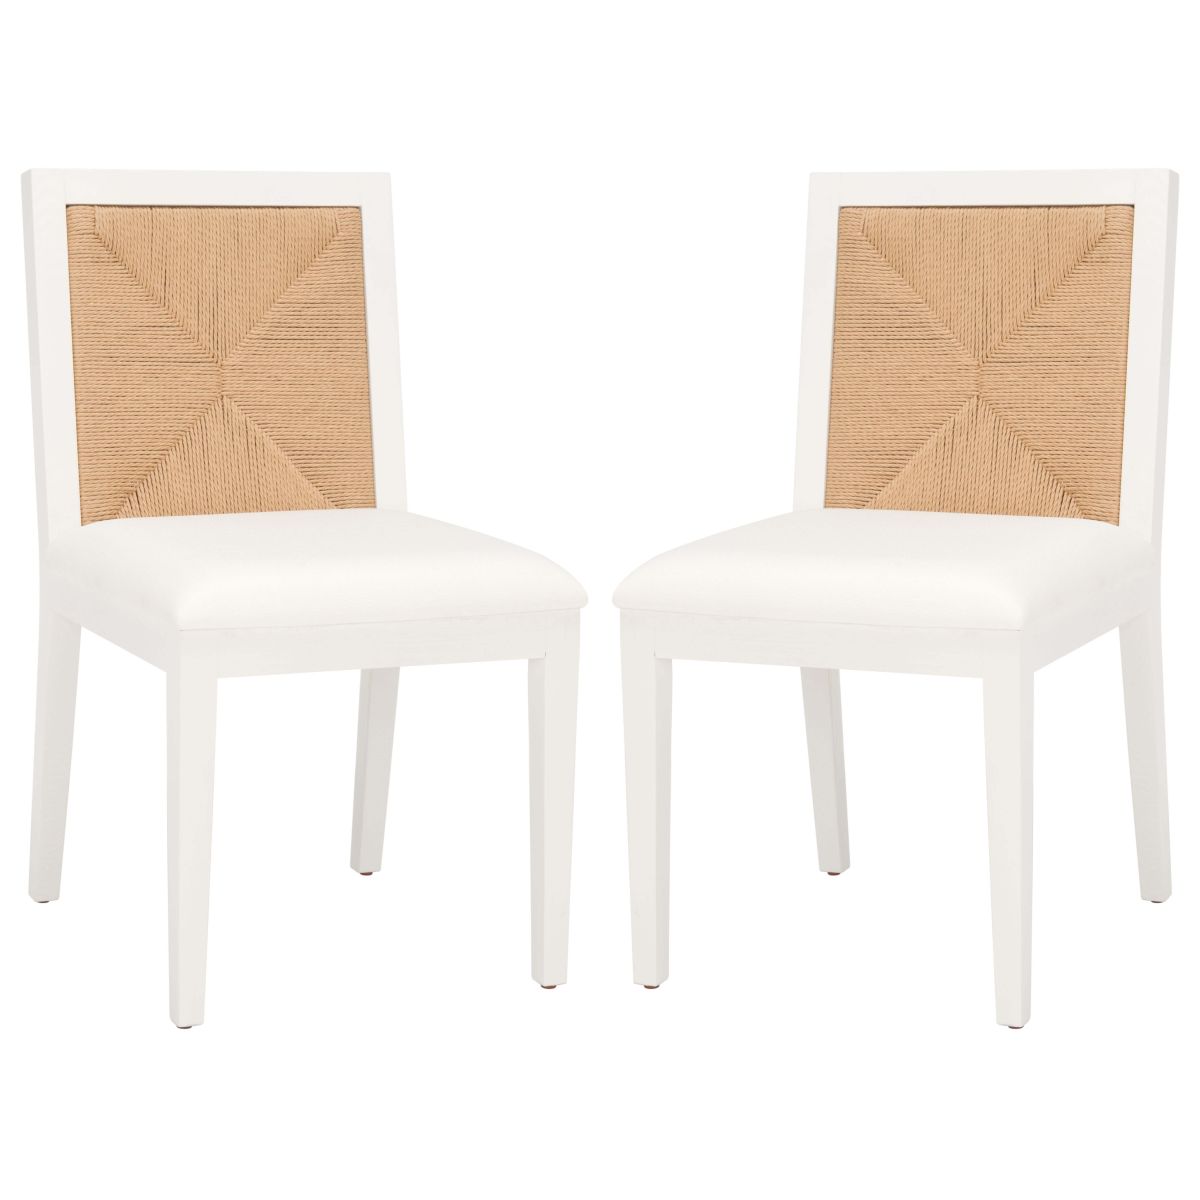 Safavieh Couture Emilio Woven Dining Chair